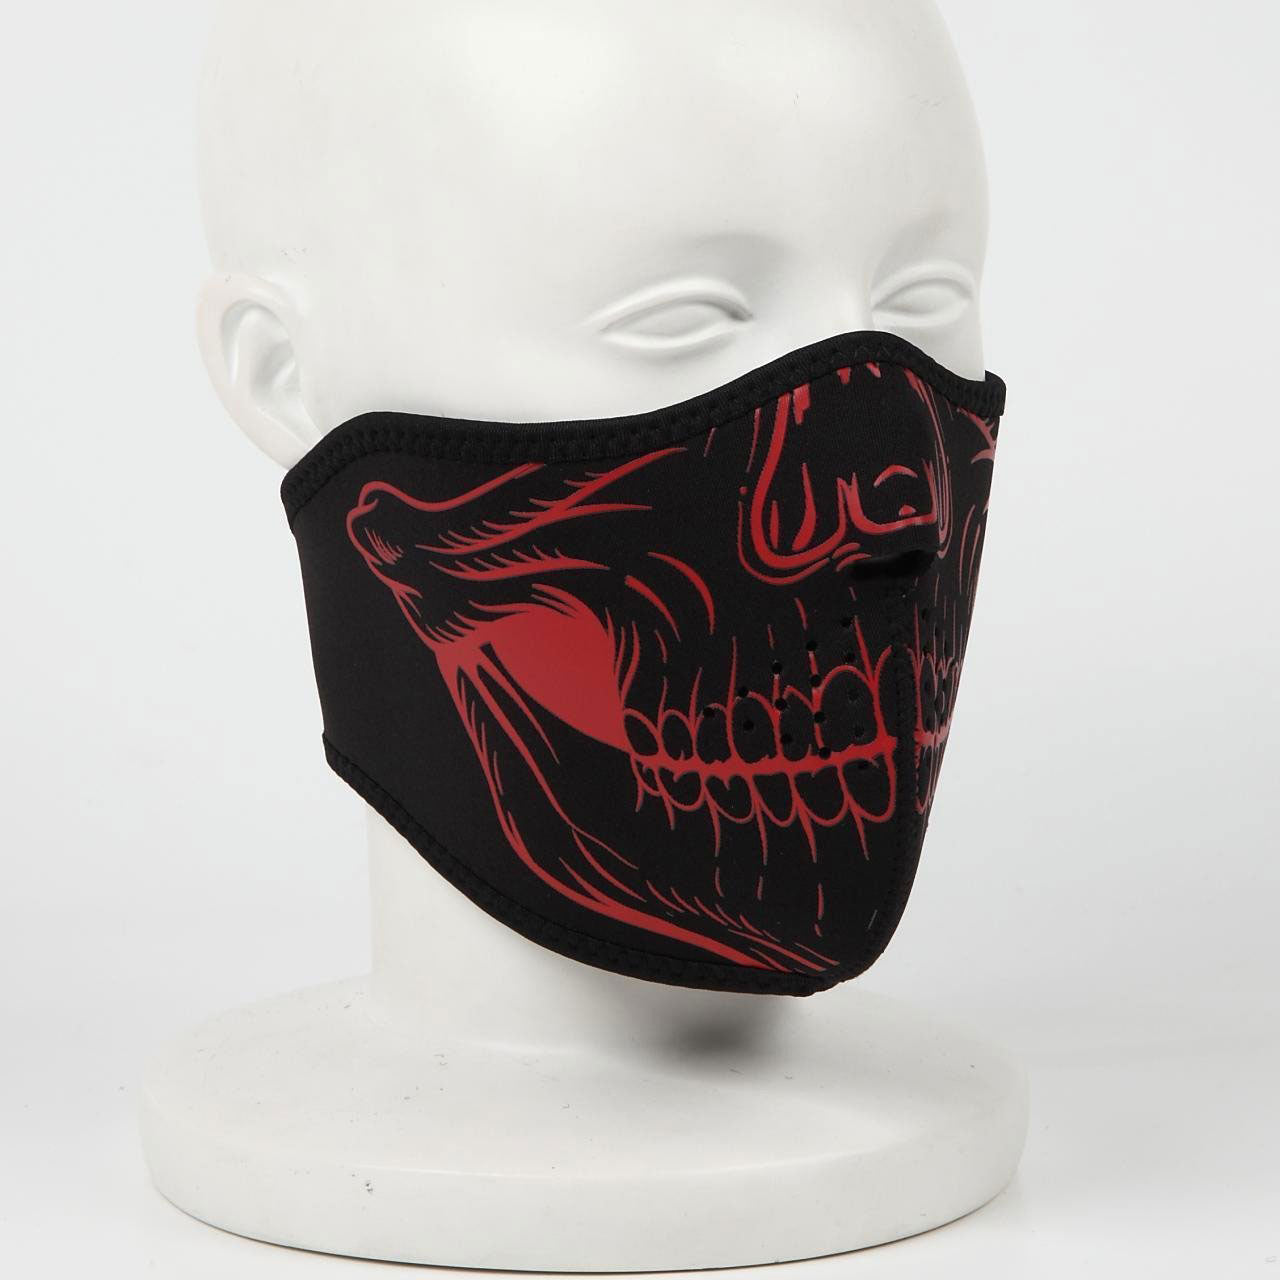 NEO FACEMASK RFM03 X/SKULL RED